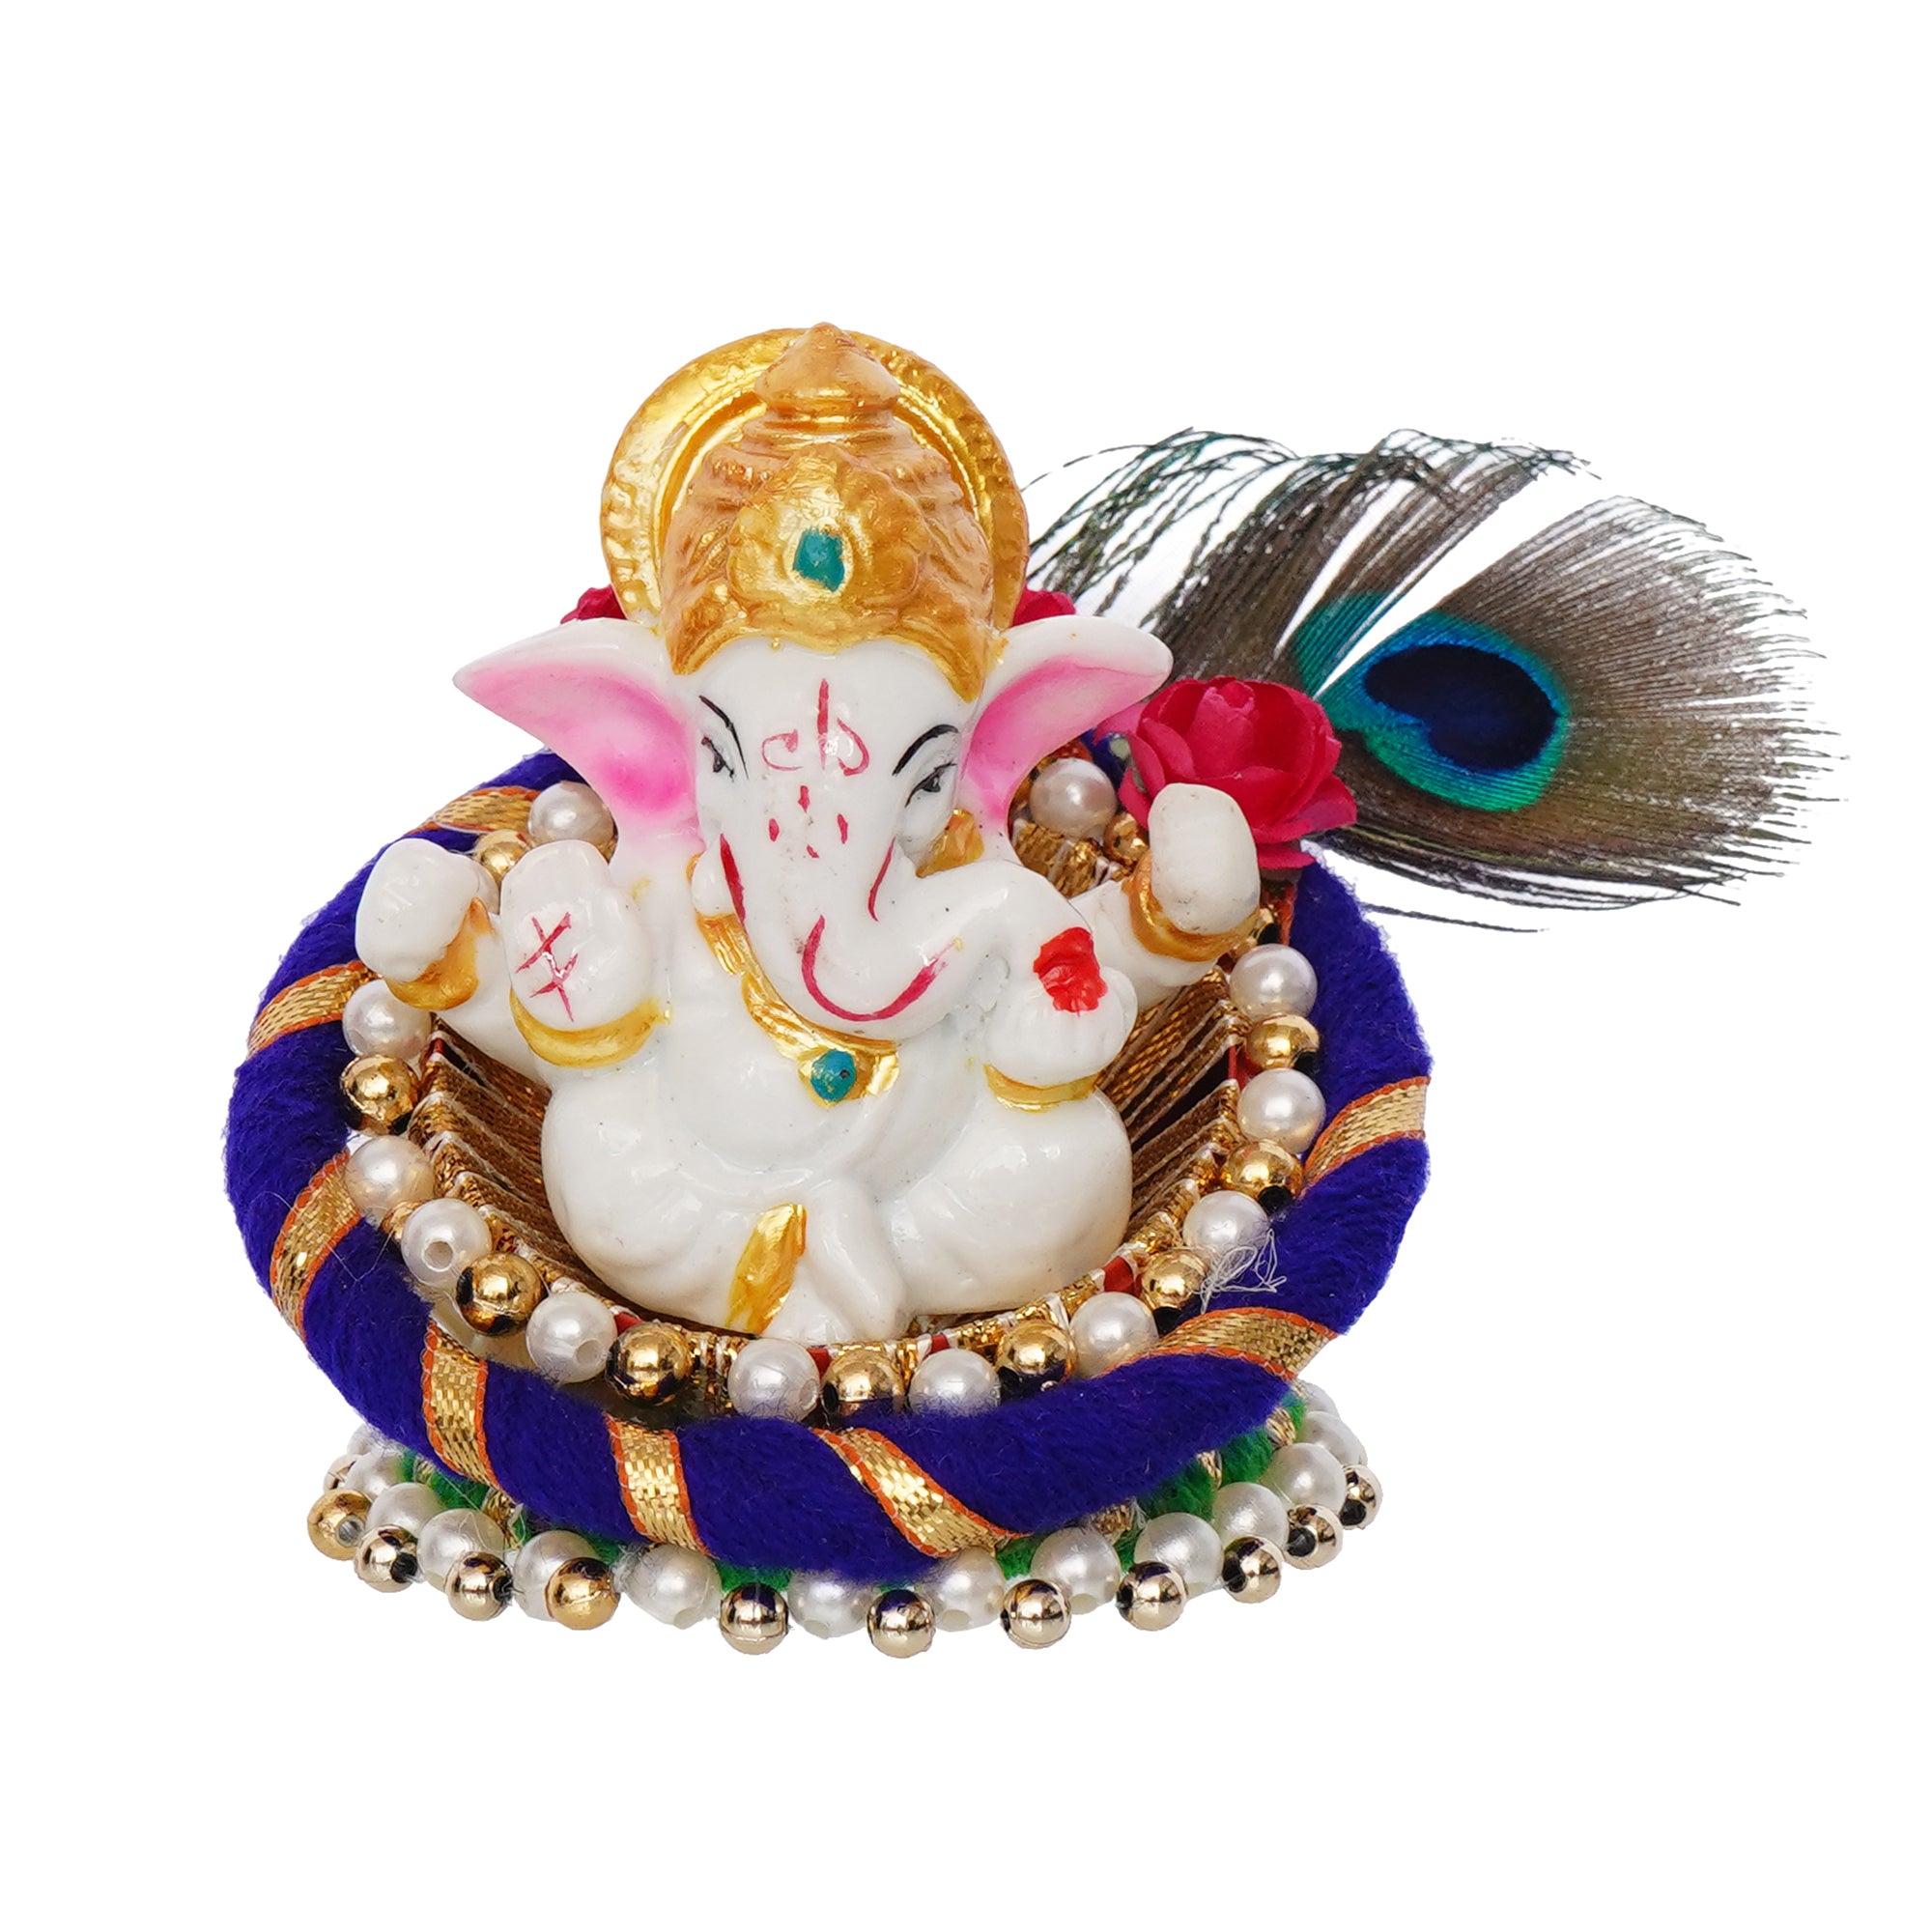 Polyresin Lord Ganesha Idol on Decorative Handcrafted Floral Plate for Home, Office and Car Dashboard 2